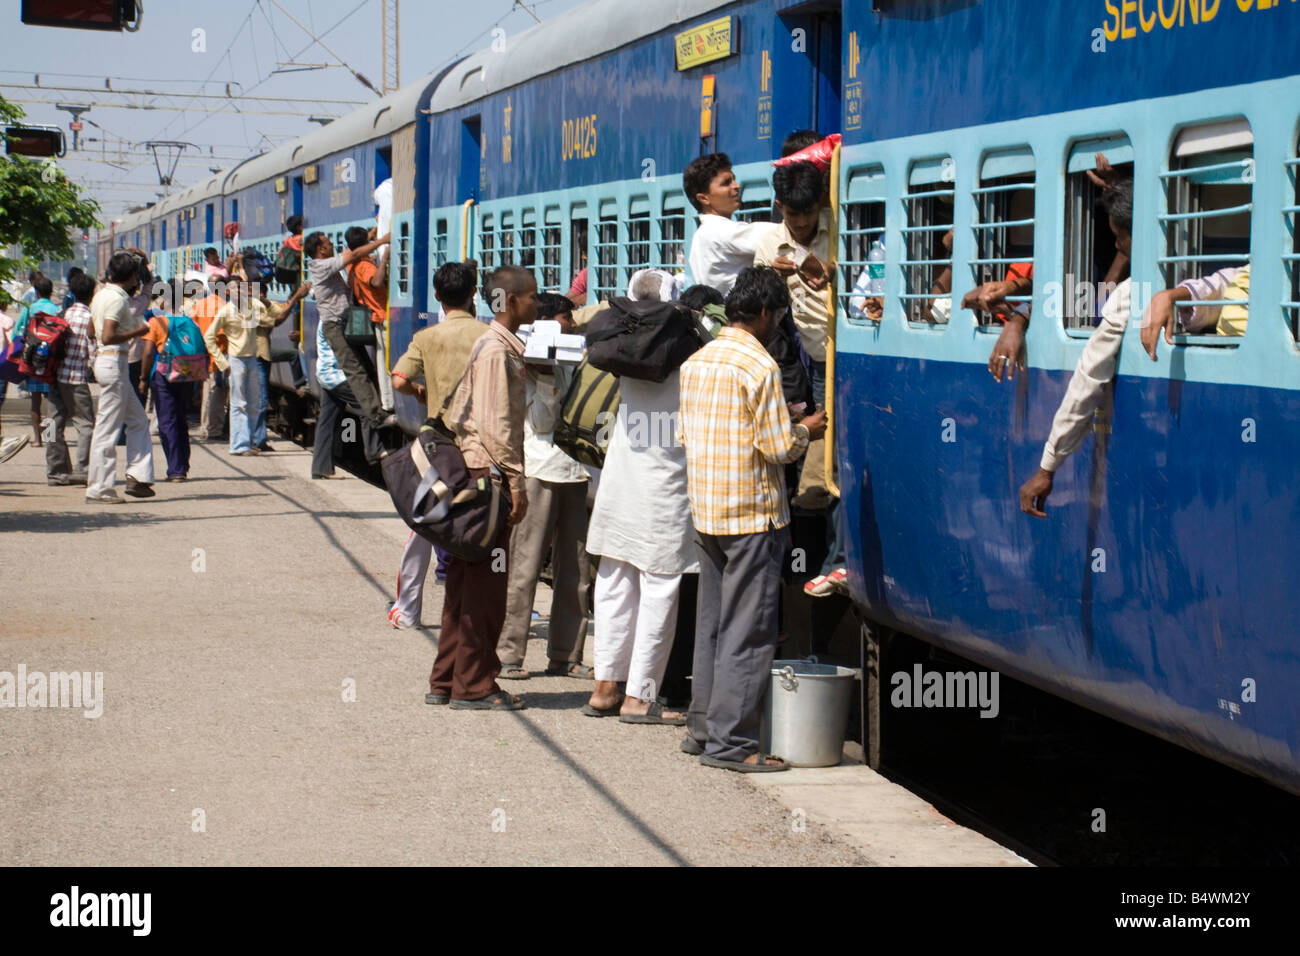 Crowds of people queuing to get onto a train, Bharatpur station, Rajasthan, India, asia Stock Photo